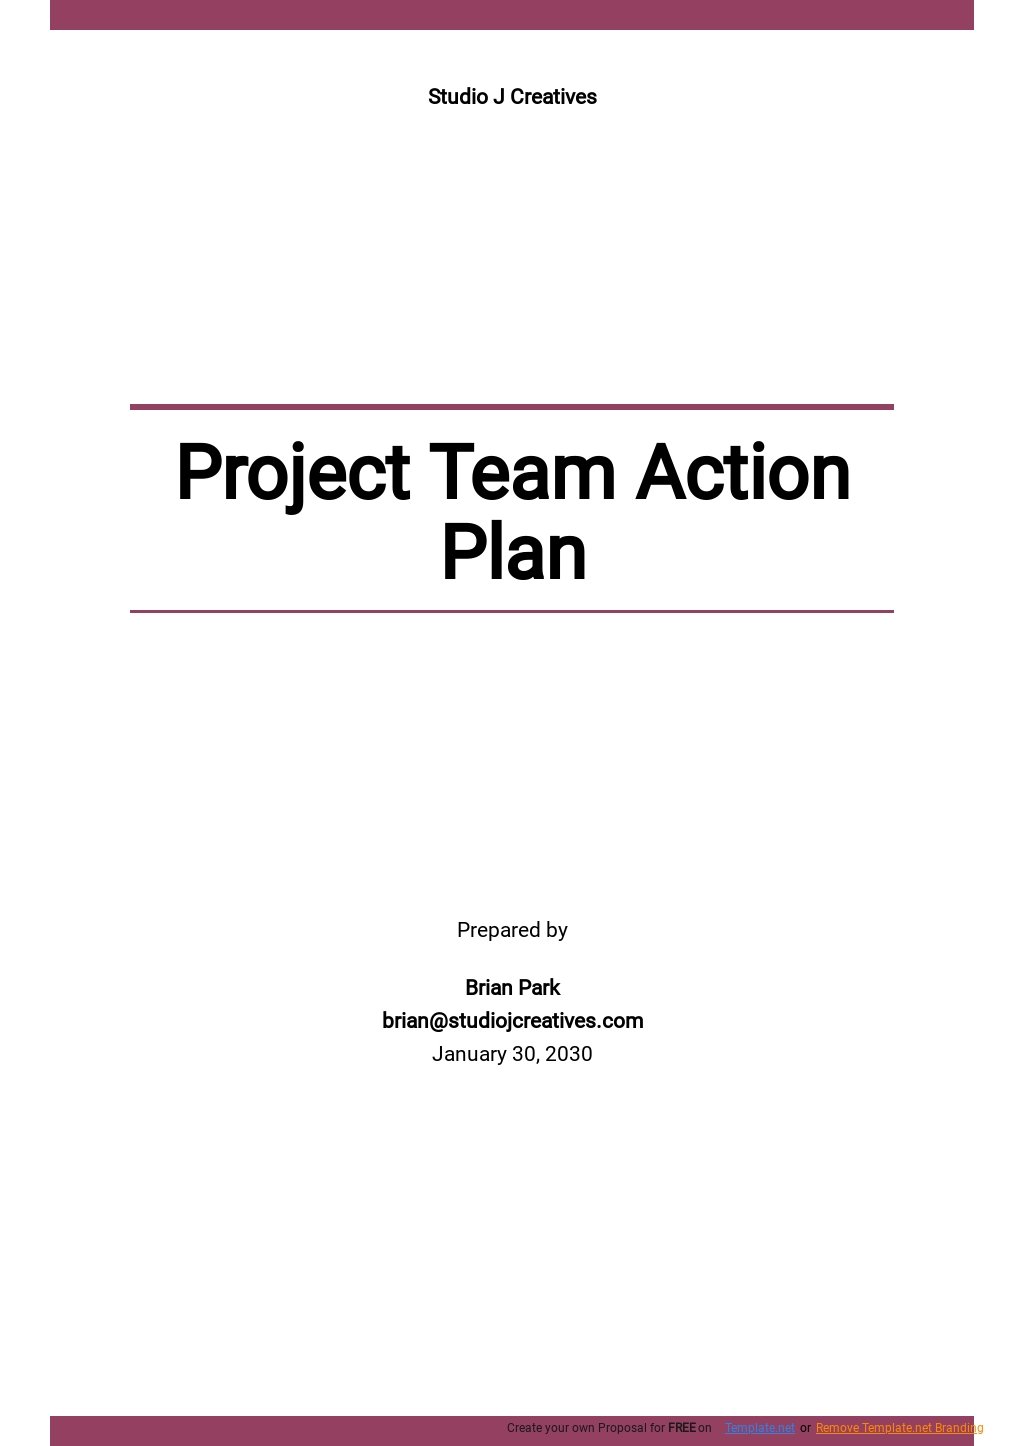 Project Action Plans